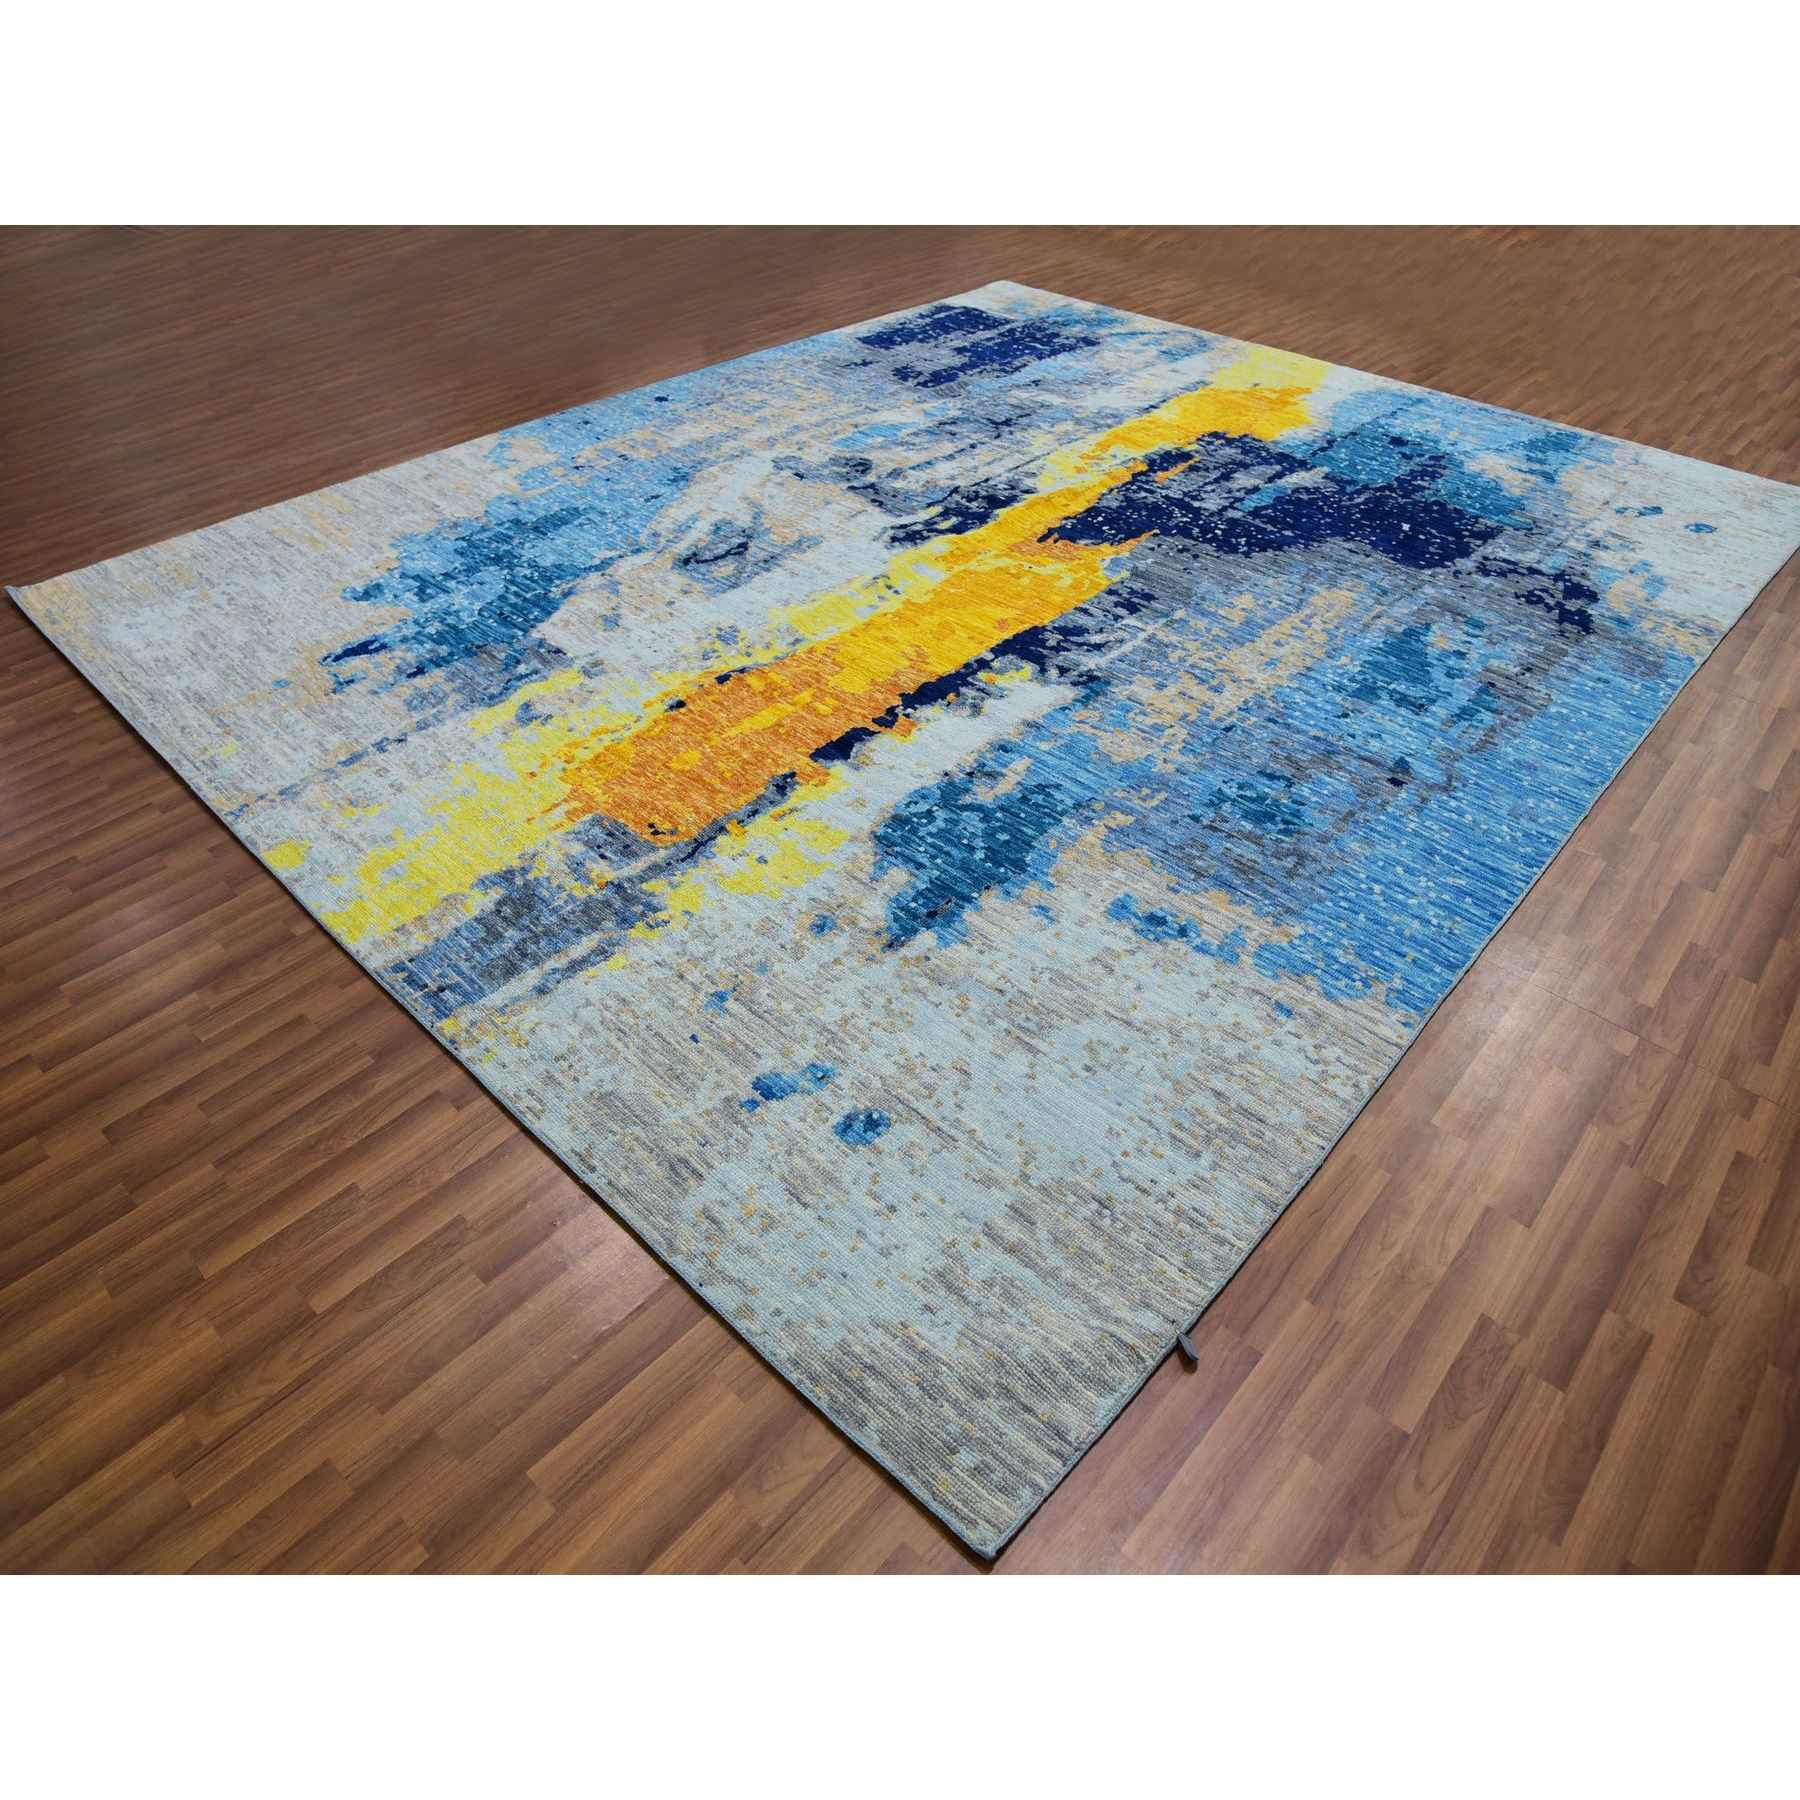 Modern-and-Contemporary-Hand-Knotted-Rug-399570